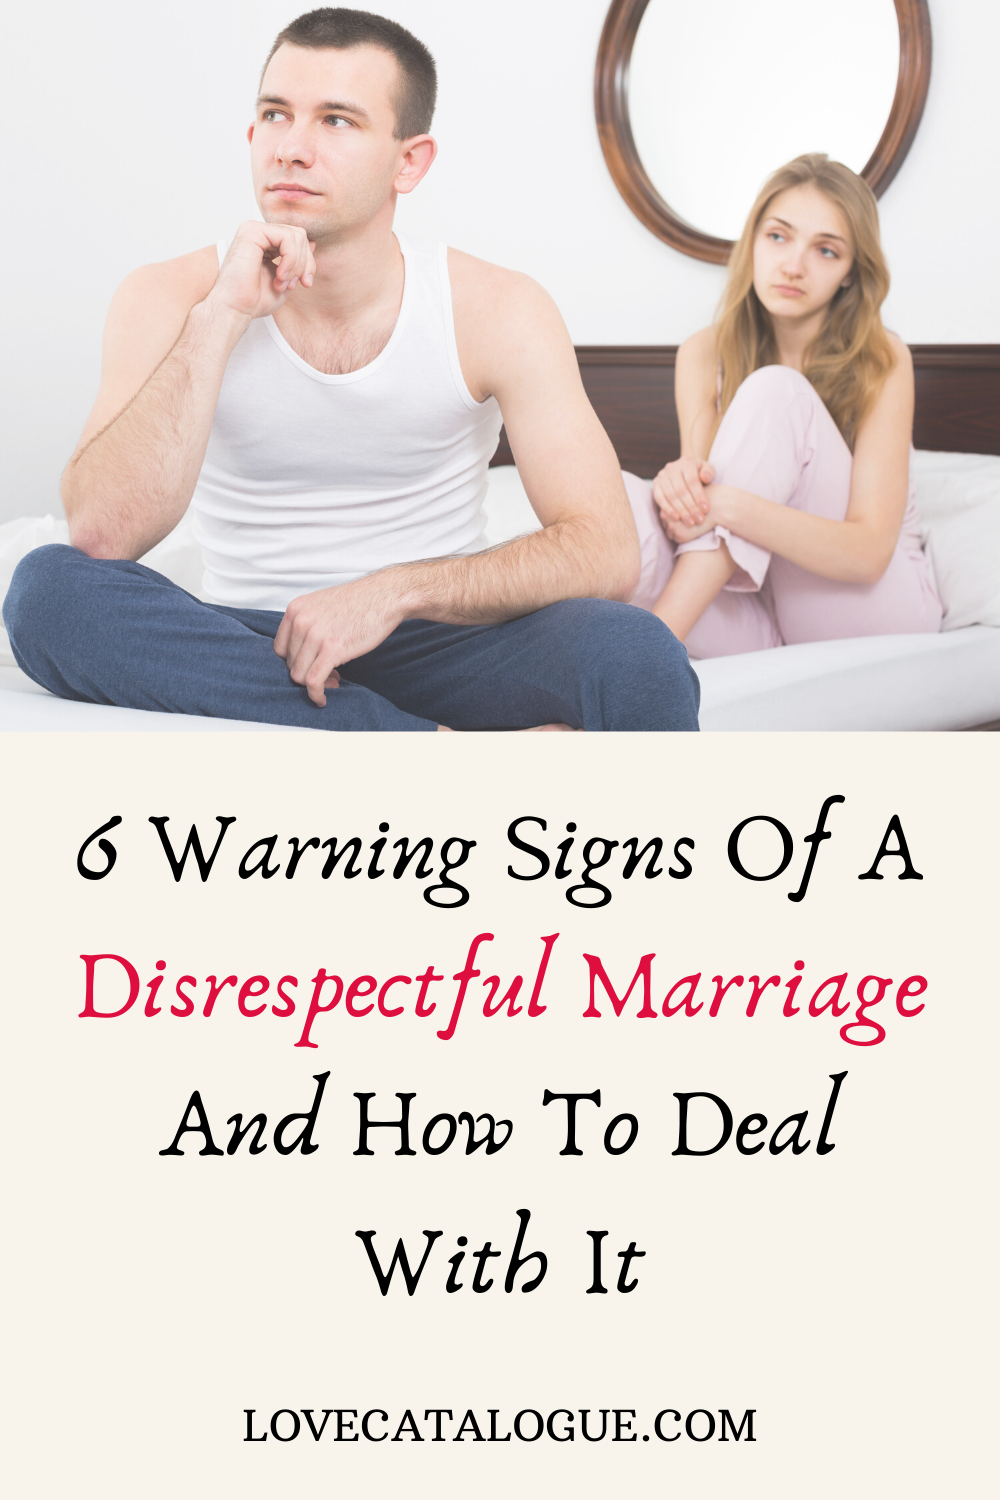 my husband has no respect for me or my feelings